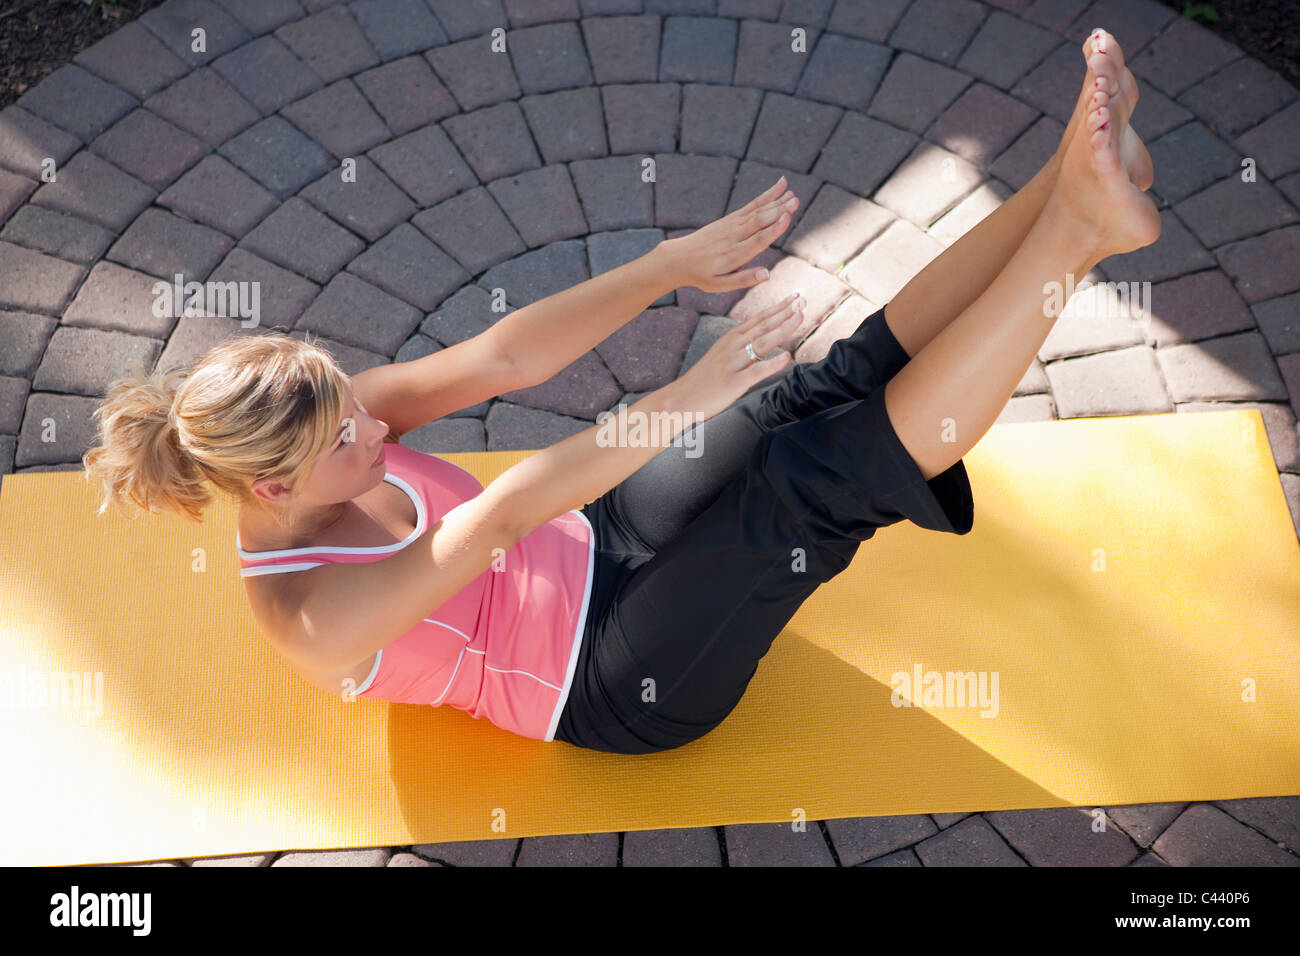 Woman practicing Pilates outside on a yoga mat Stock Photo